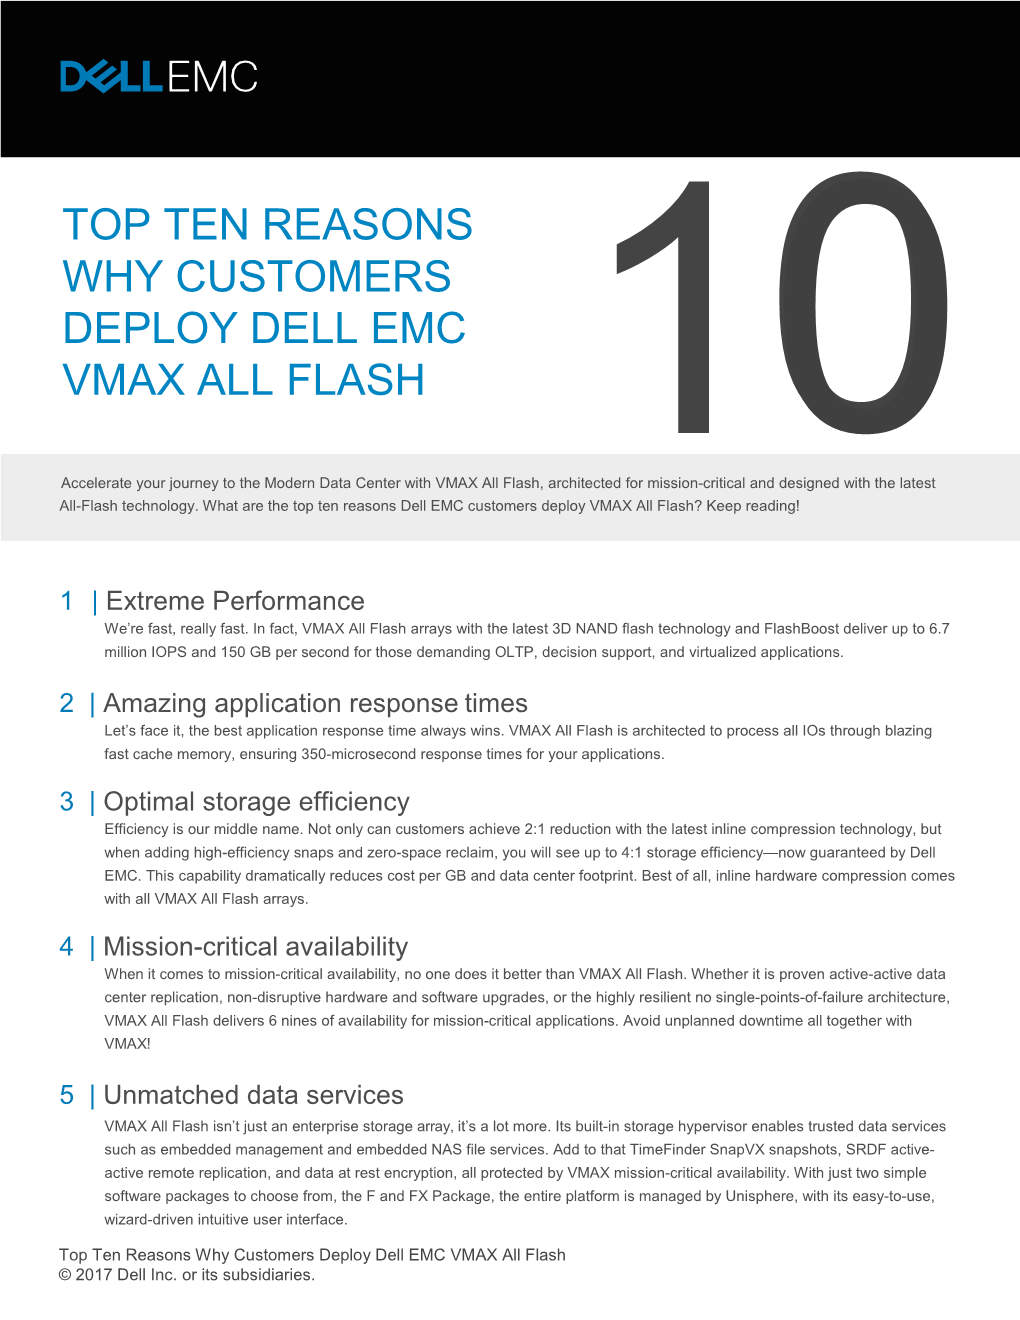 Top 10 Reasons Why Customers Deploy VMAX All Flash